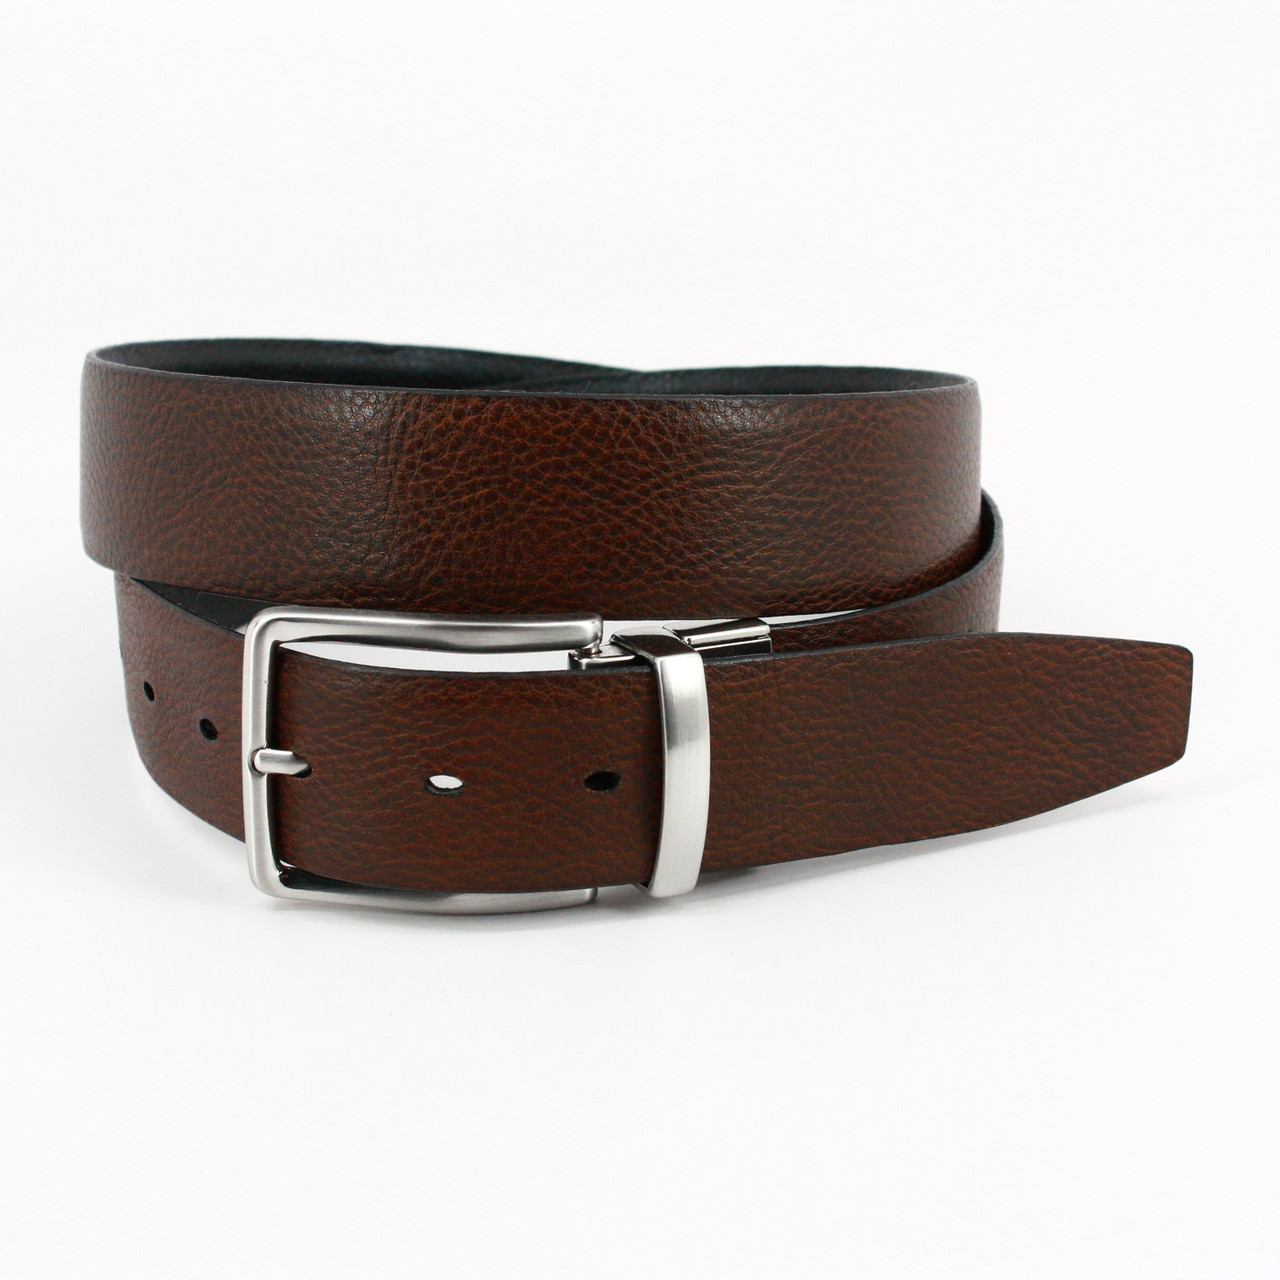 Italian Aniline Leather - Reversible Belt Black to Brown